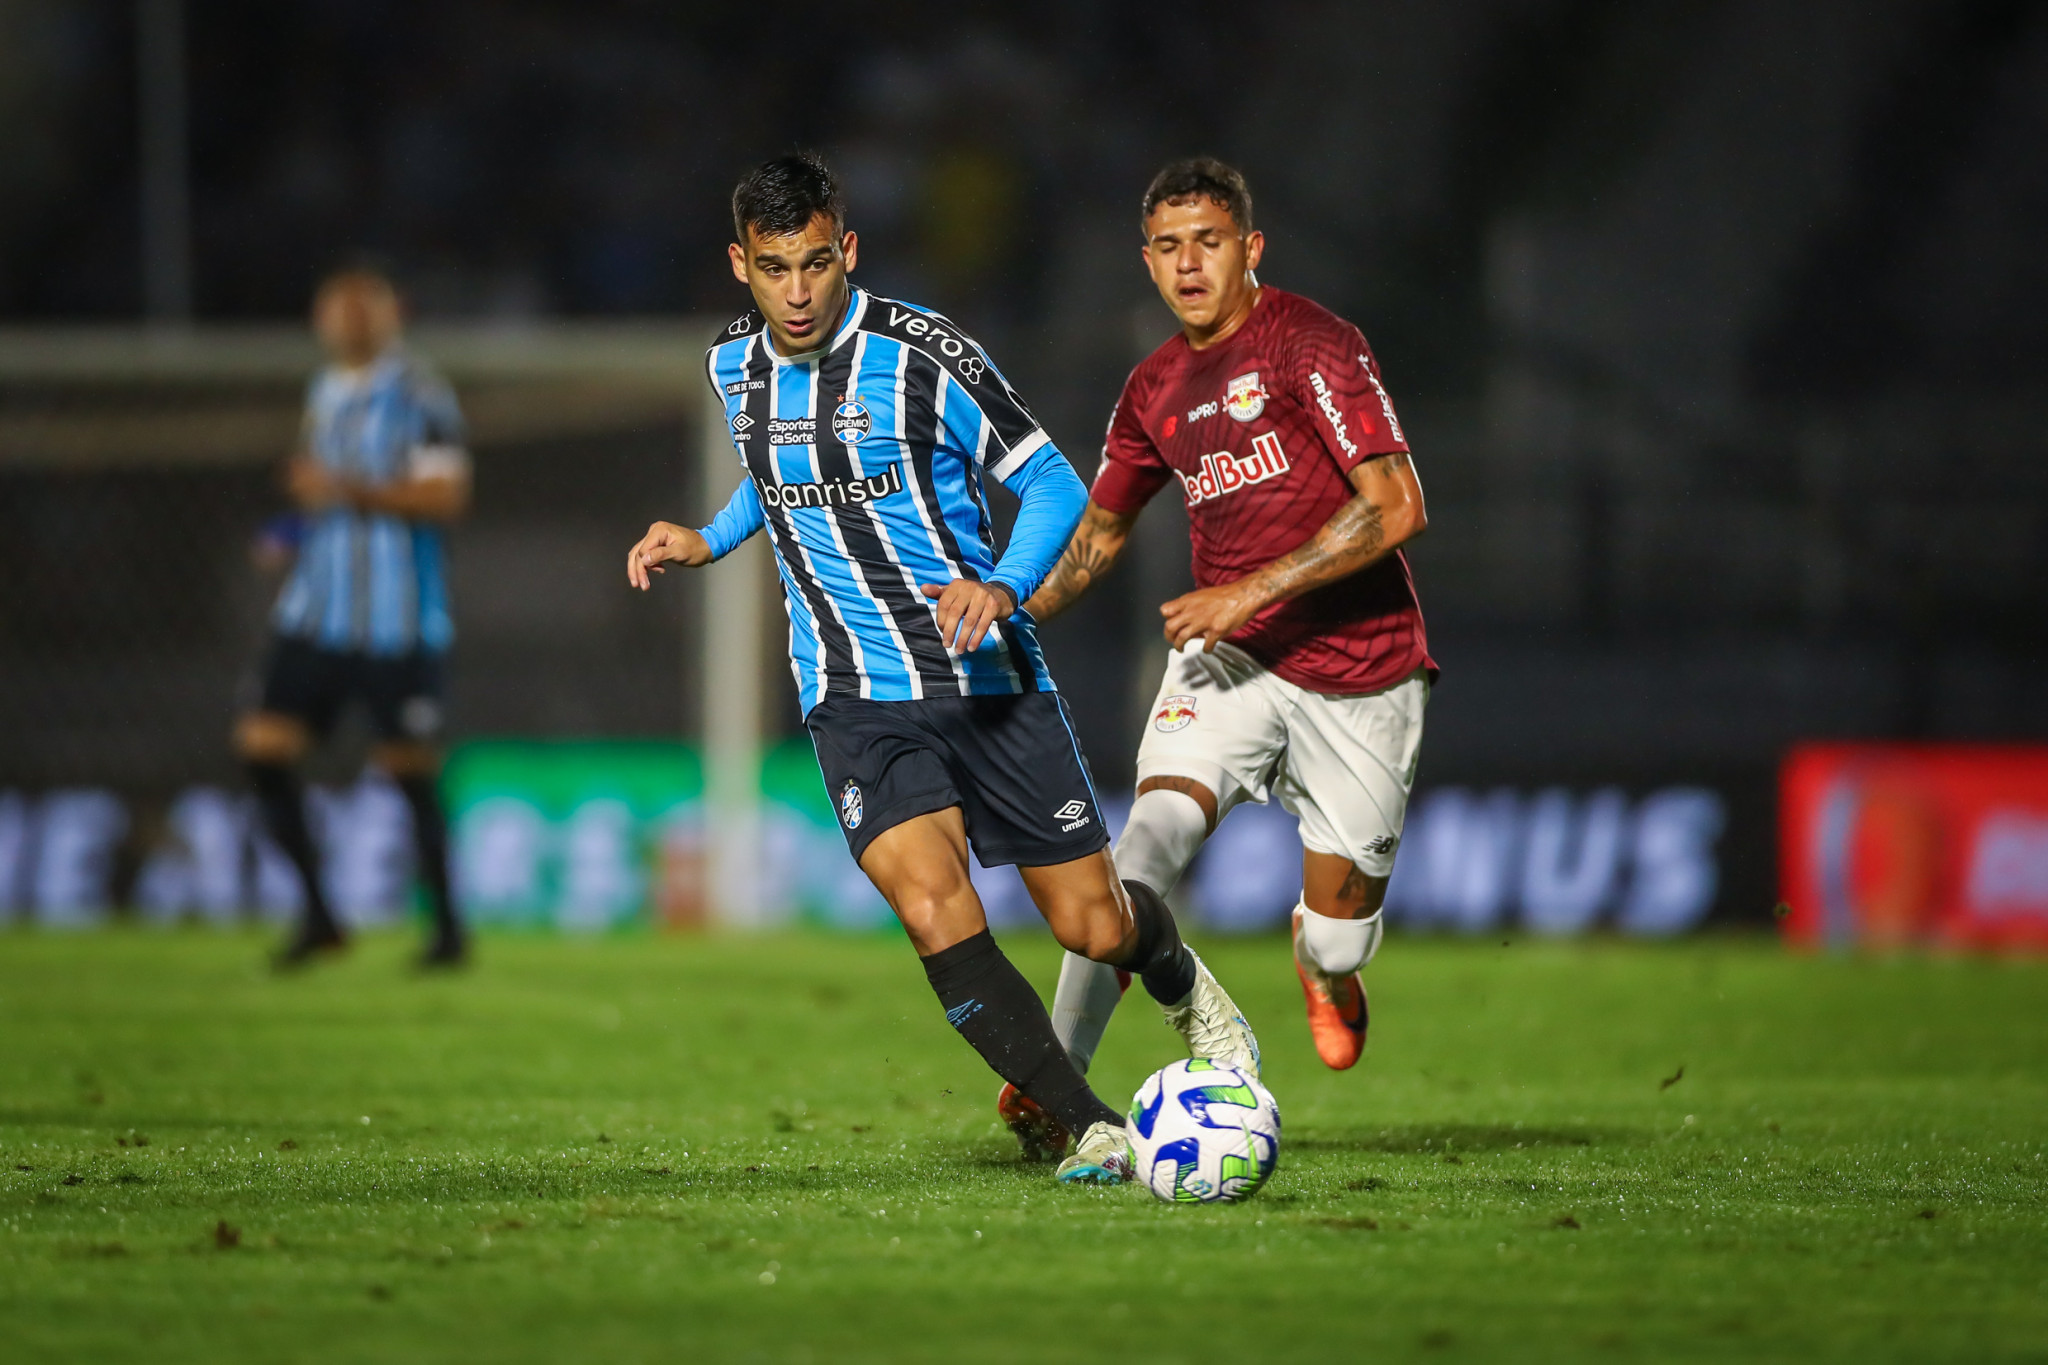 Aderlan of Bragantino competes for the ball with Bruno Henrique of